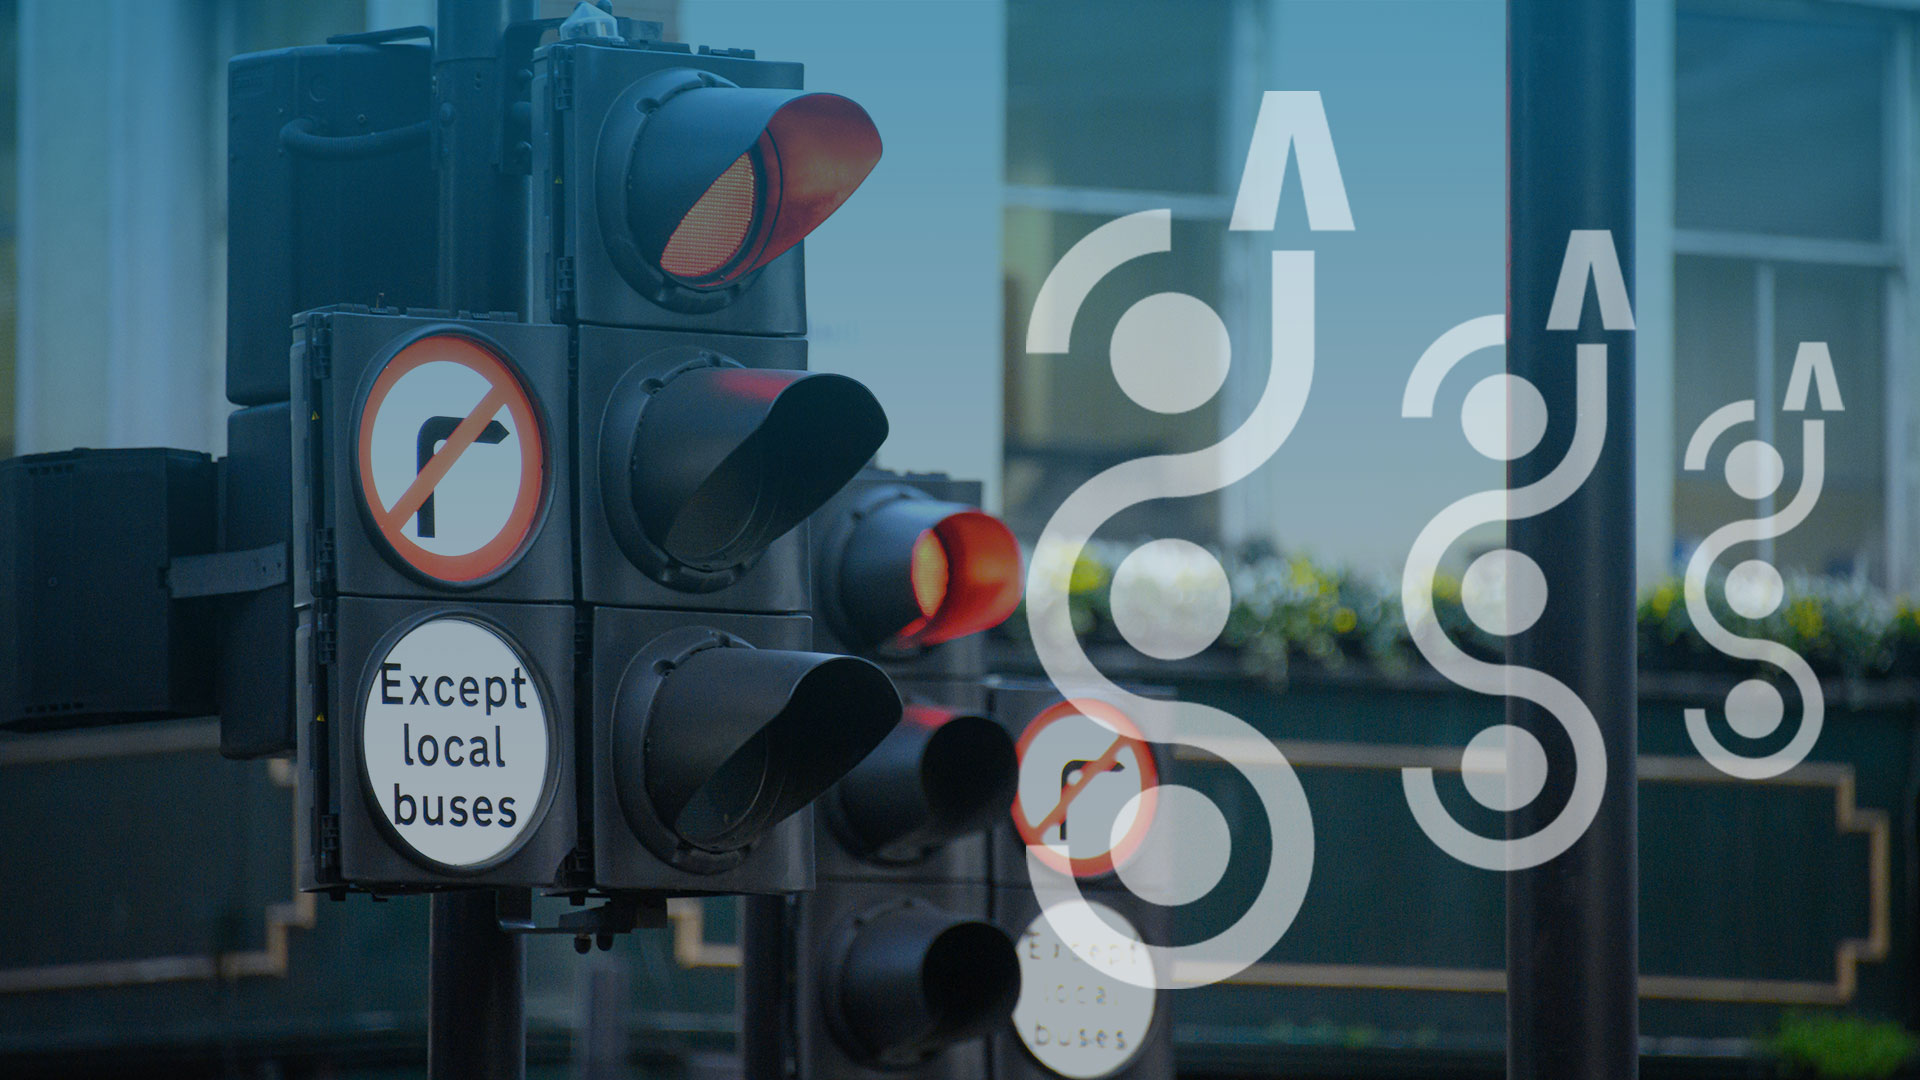 Image of traffic signals with VivaCity logo